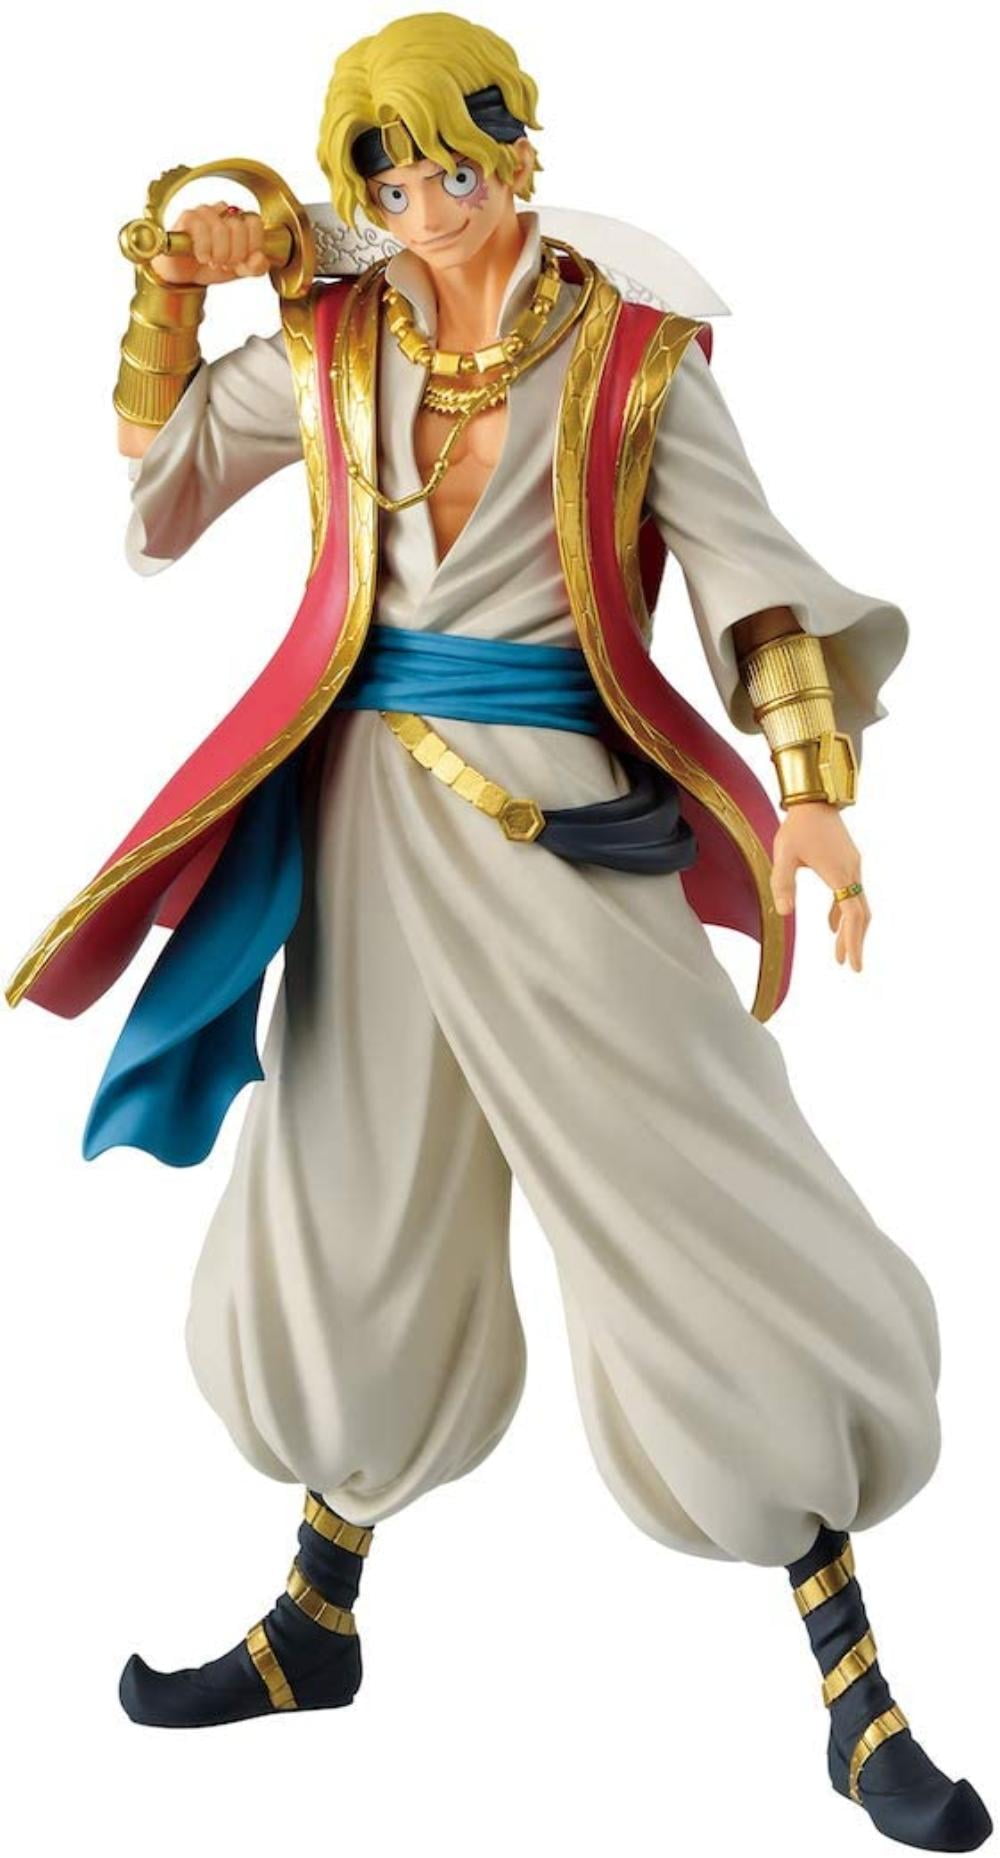 QWEIAS One Piece Action Figure Anime Statues Action Character 3D Model Toy Dolls Desktop Decorations Collectibles Home Car Dashboard Gift Games Cool A-21CM